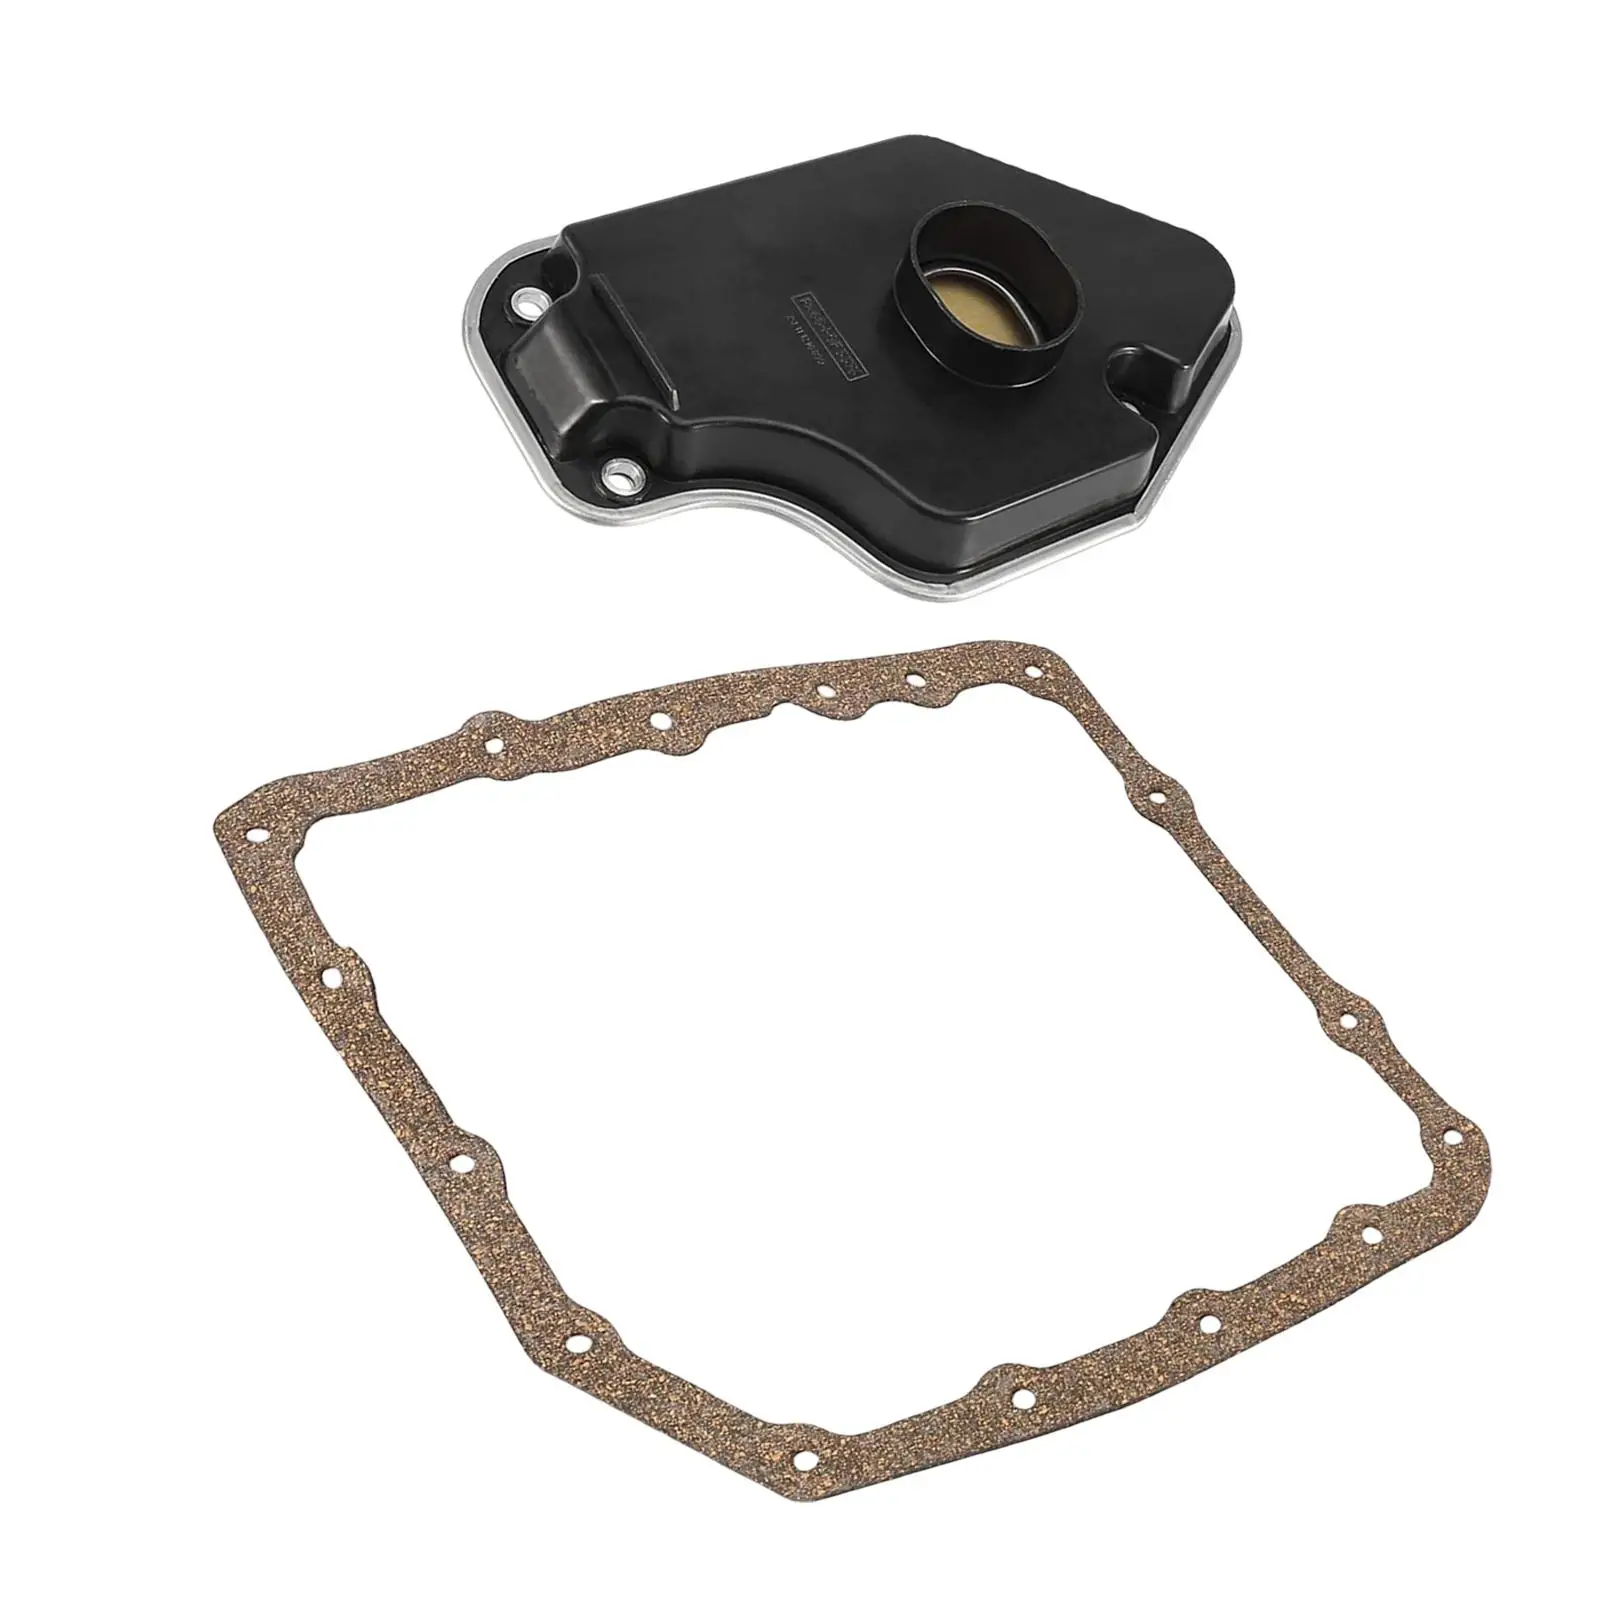 Auto Transmission Filter Oil Pan Gasket Kit, for BMW, 96015432 Parts Replace Easy to Install